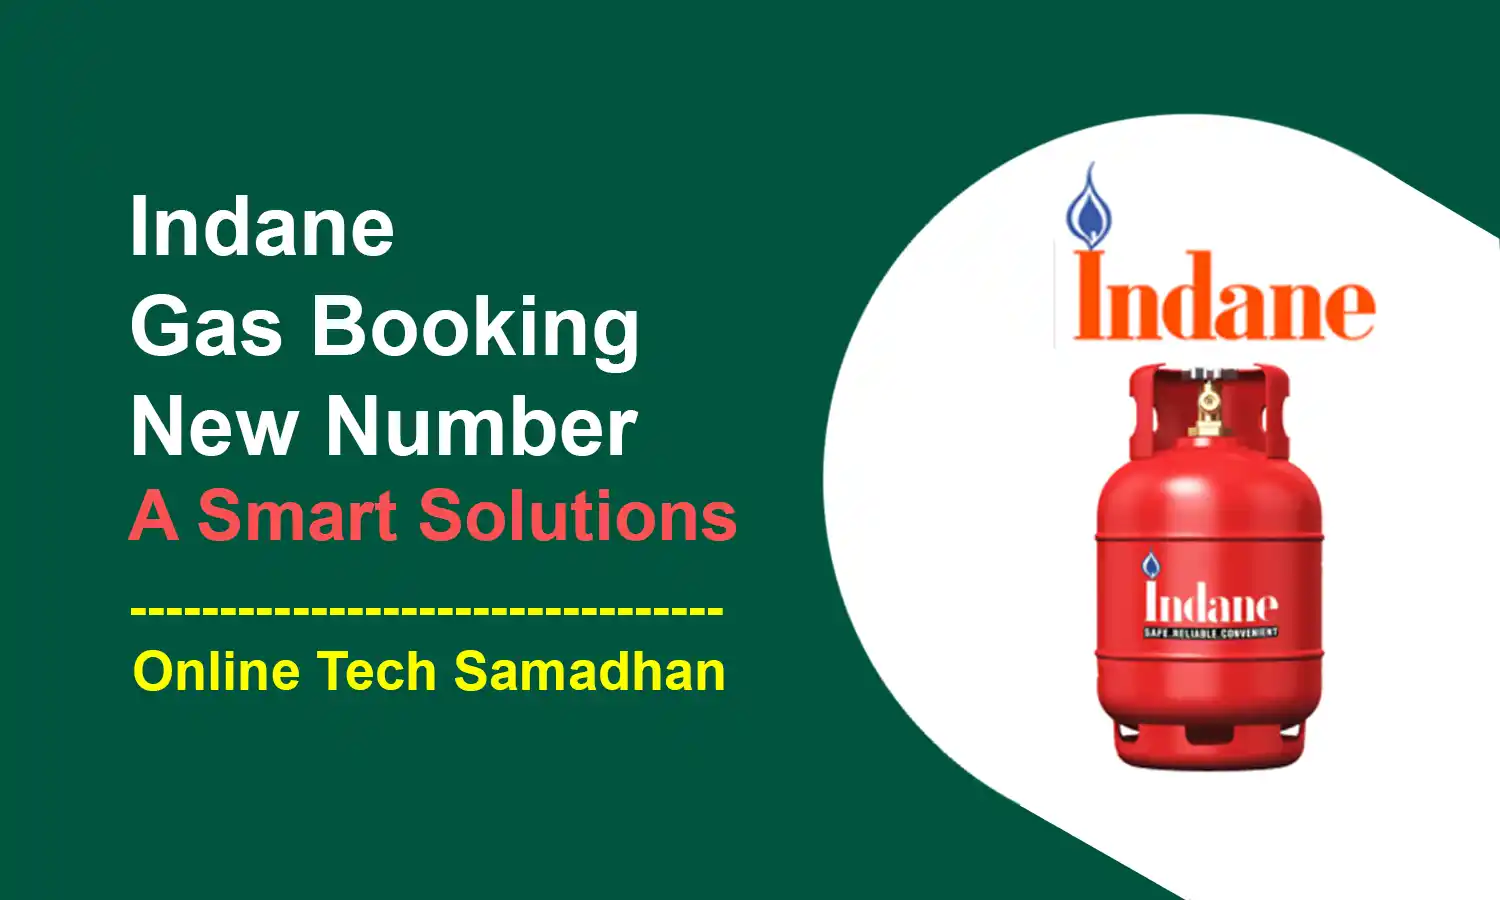 Indane Gas Booking New Number